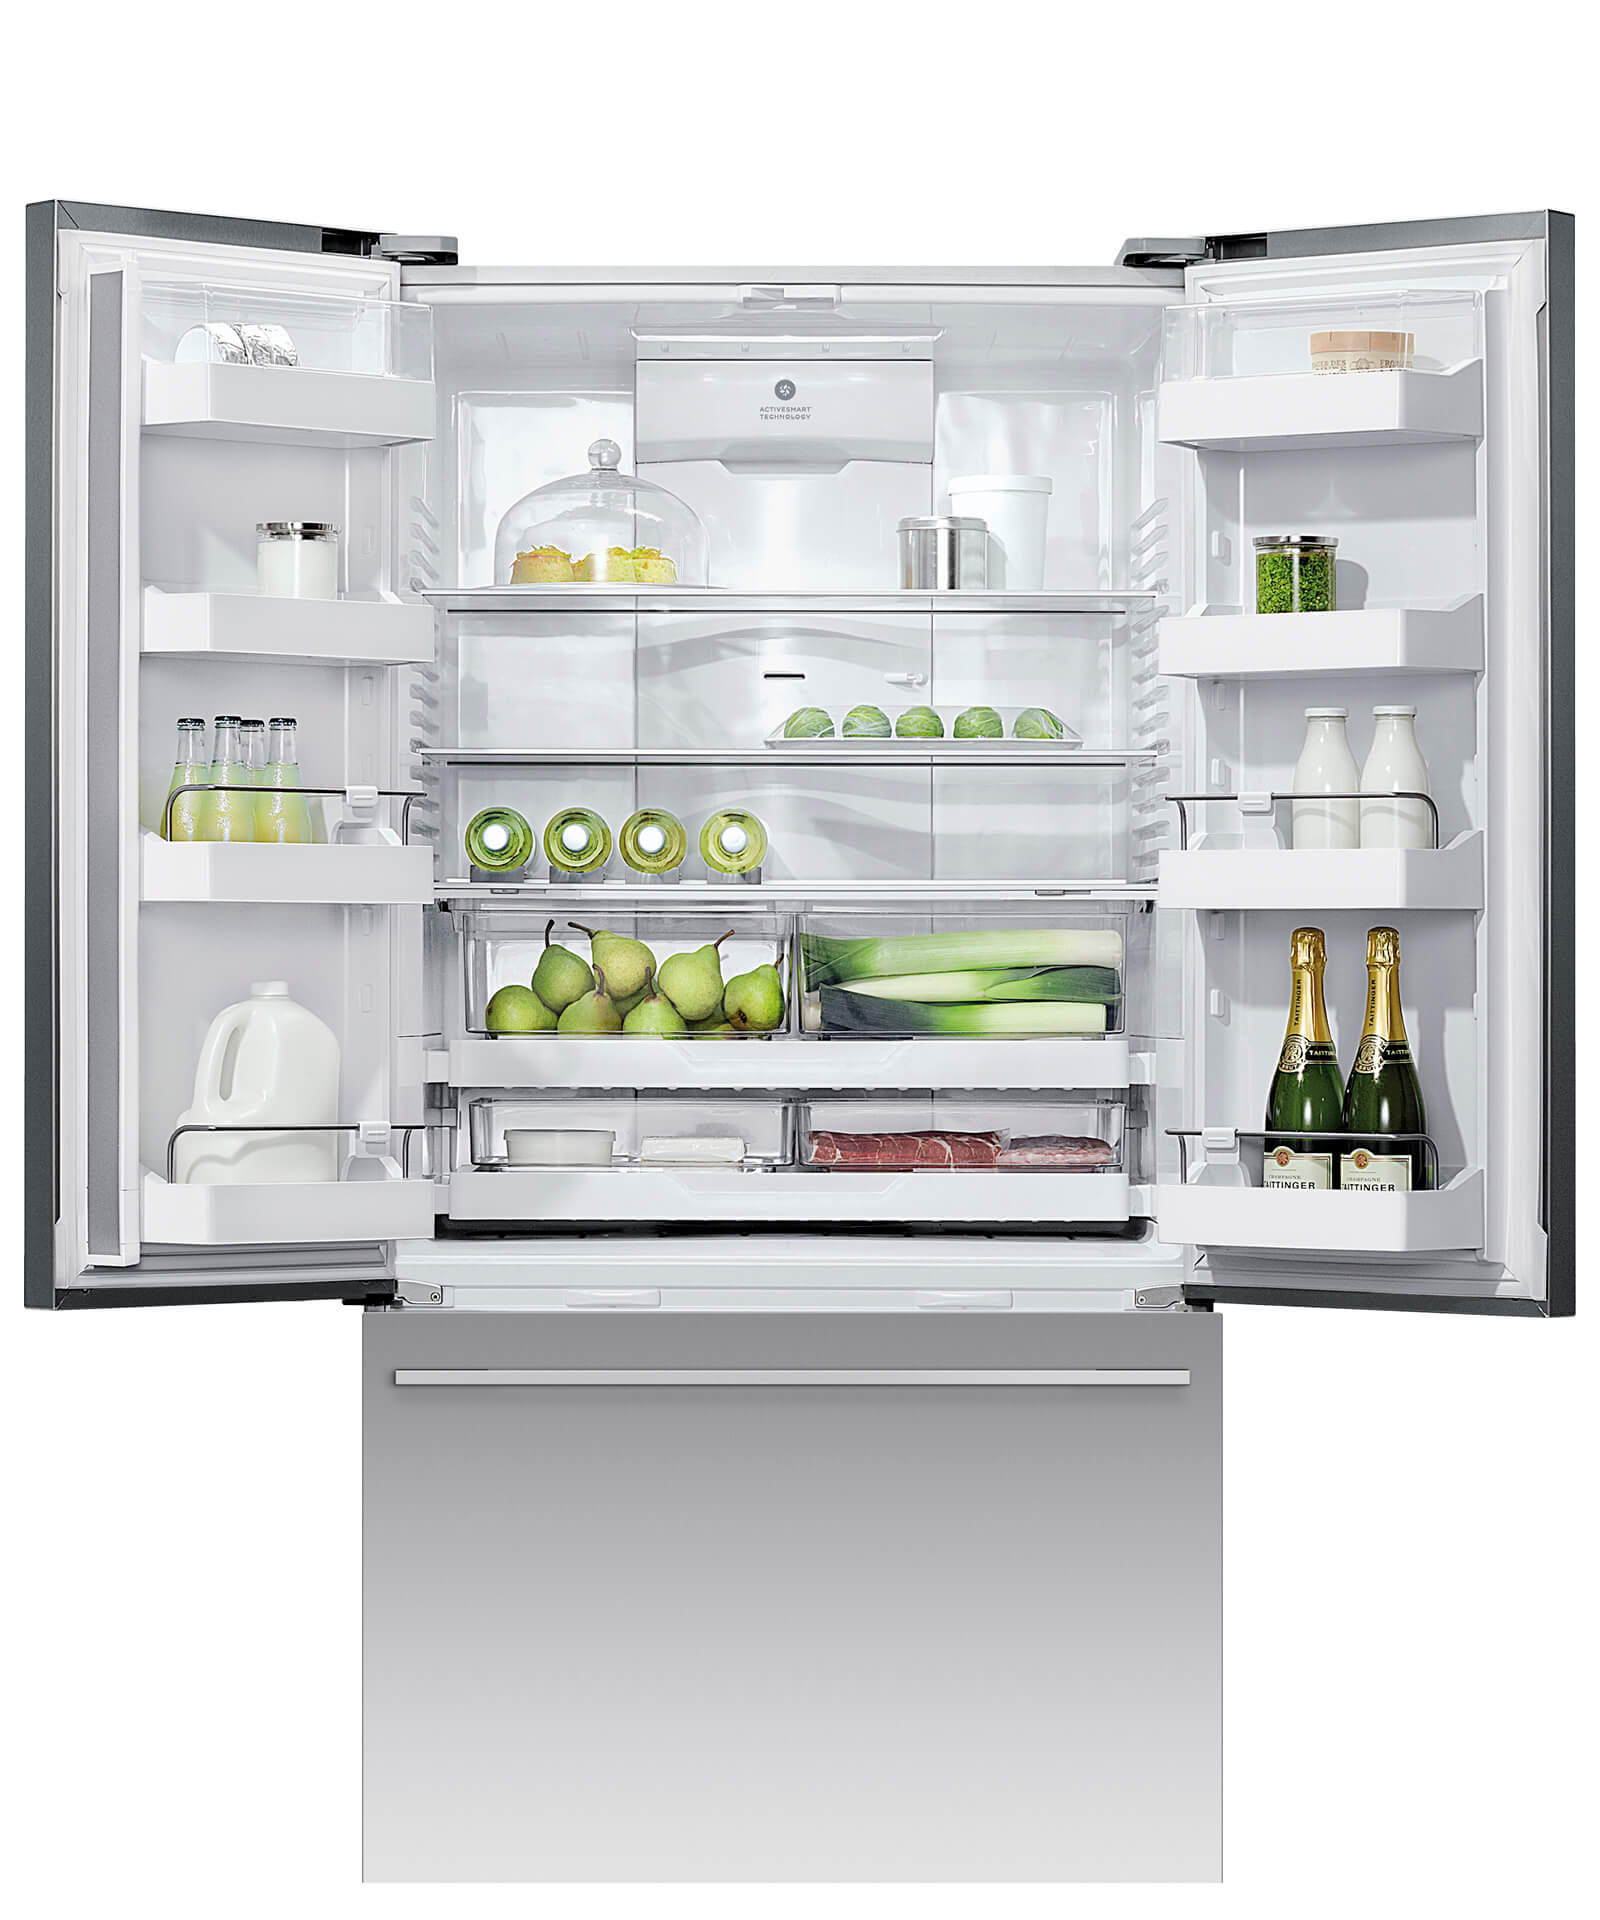 Fisher and paykel fridge manual